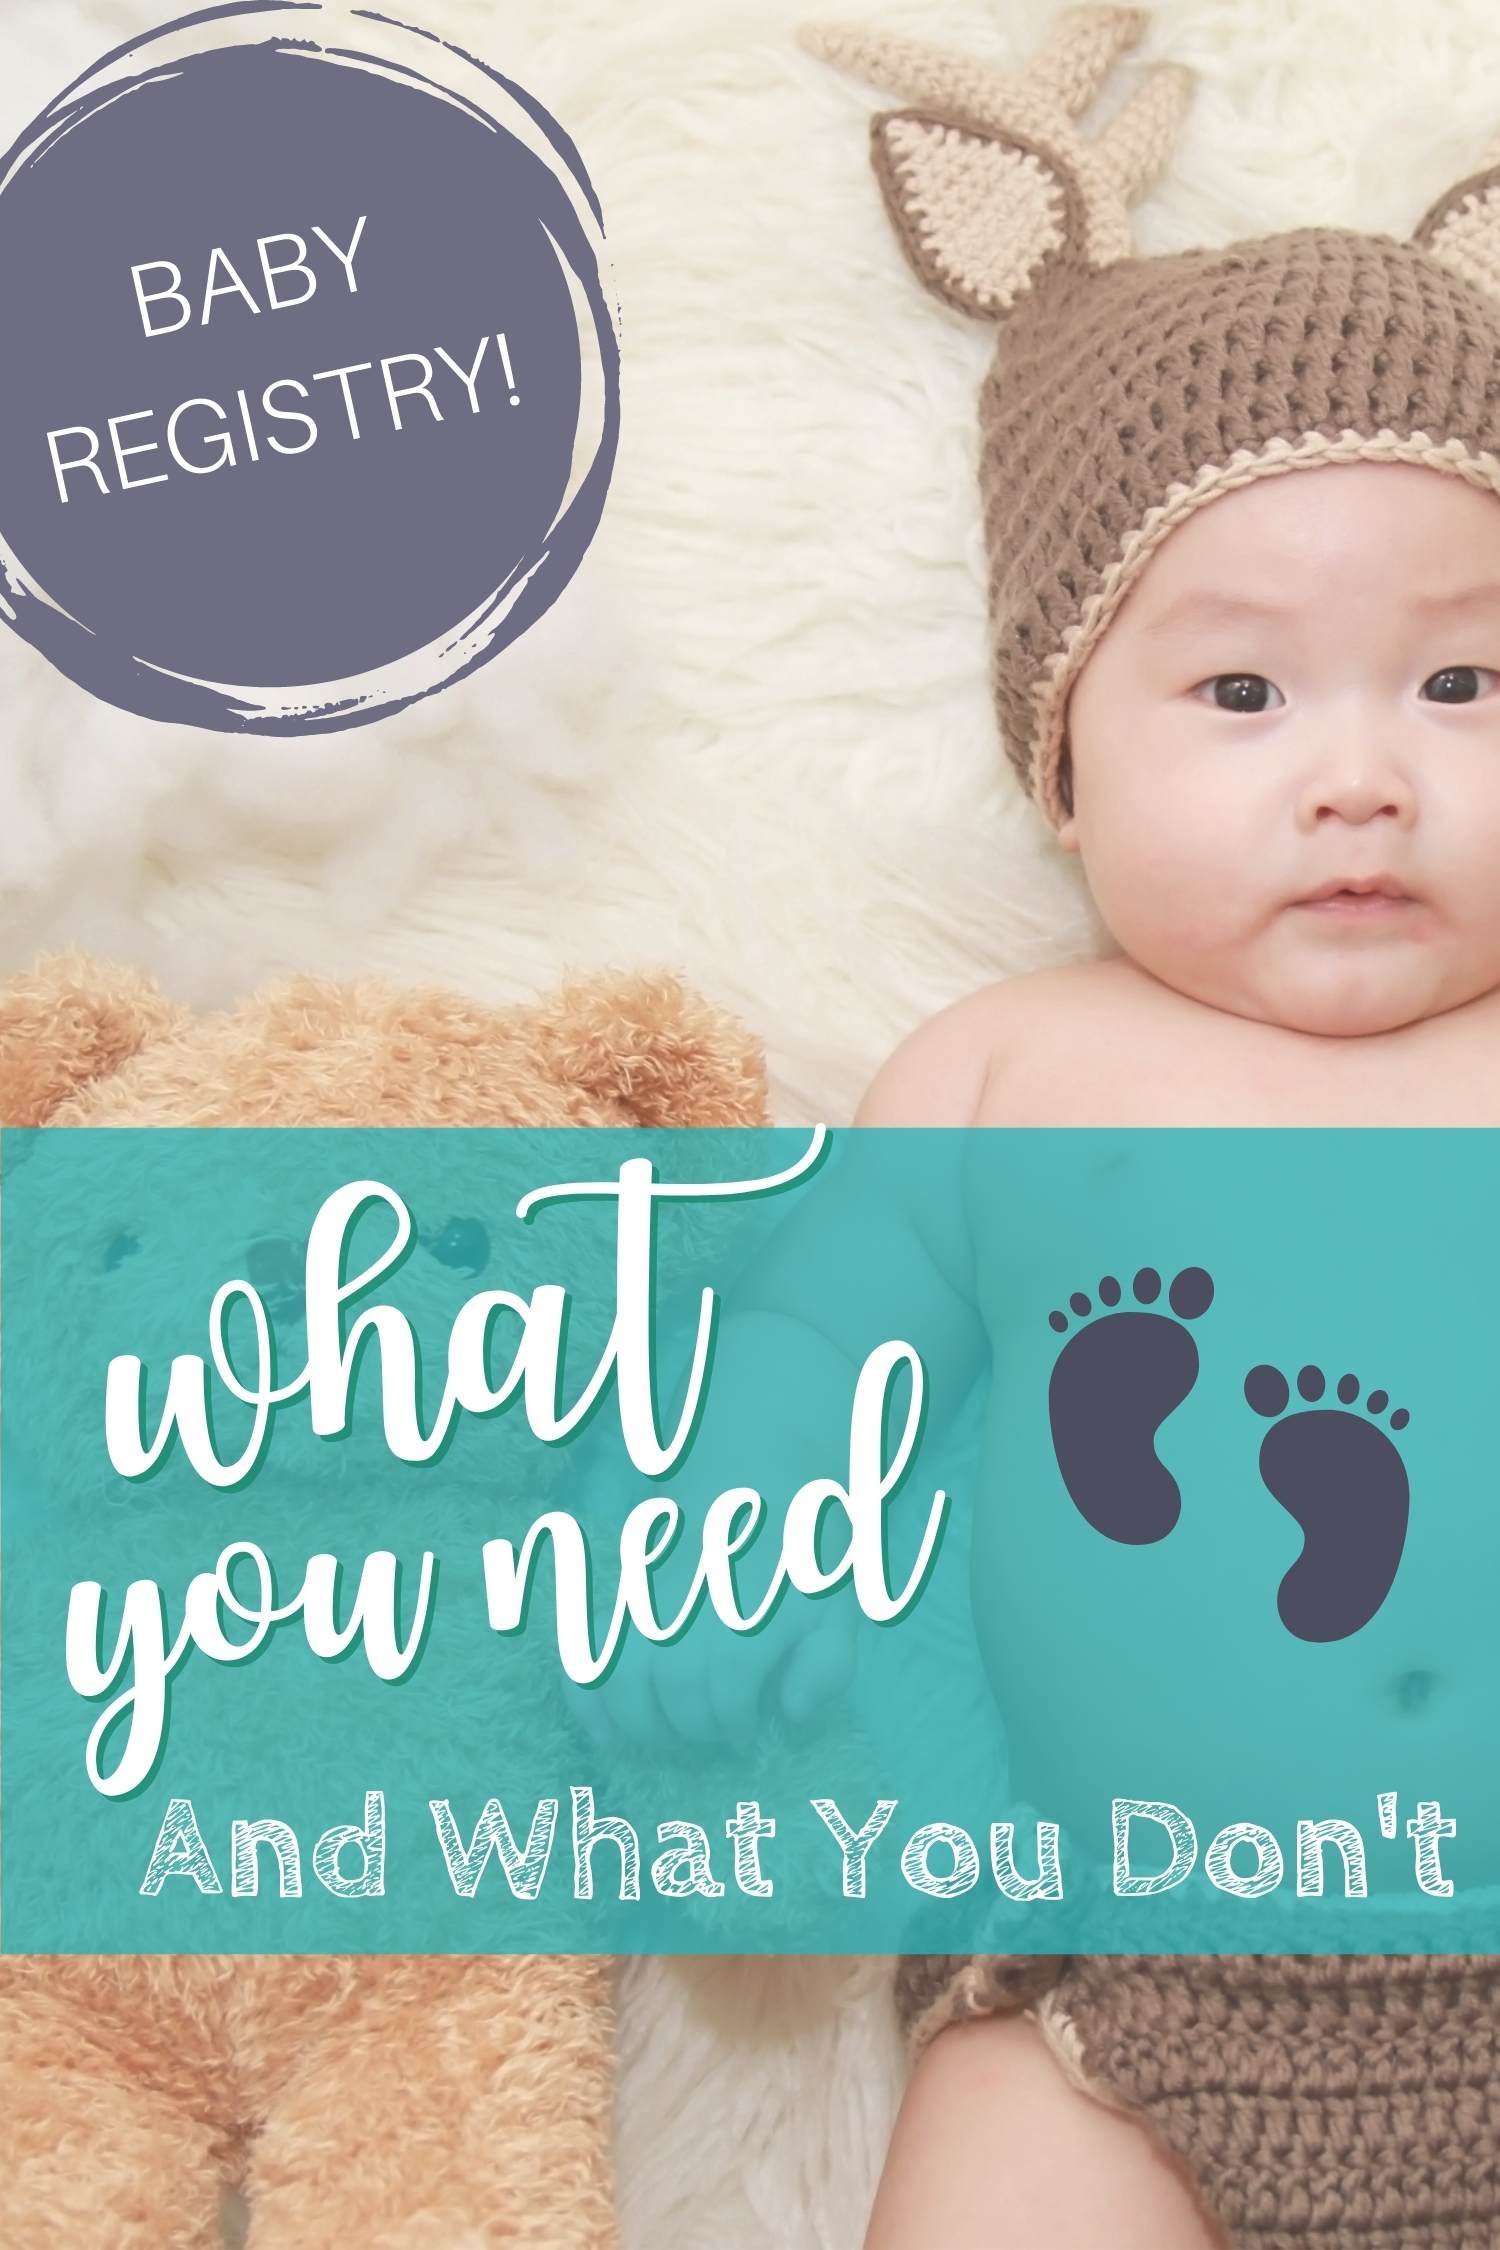 baby-registry-basics-what-you-want-vs-what-you-need-this-mom-budgets